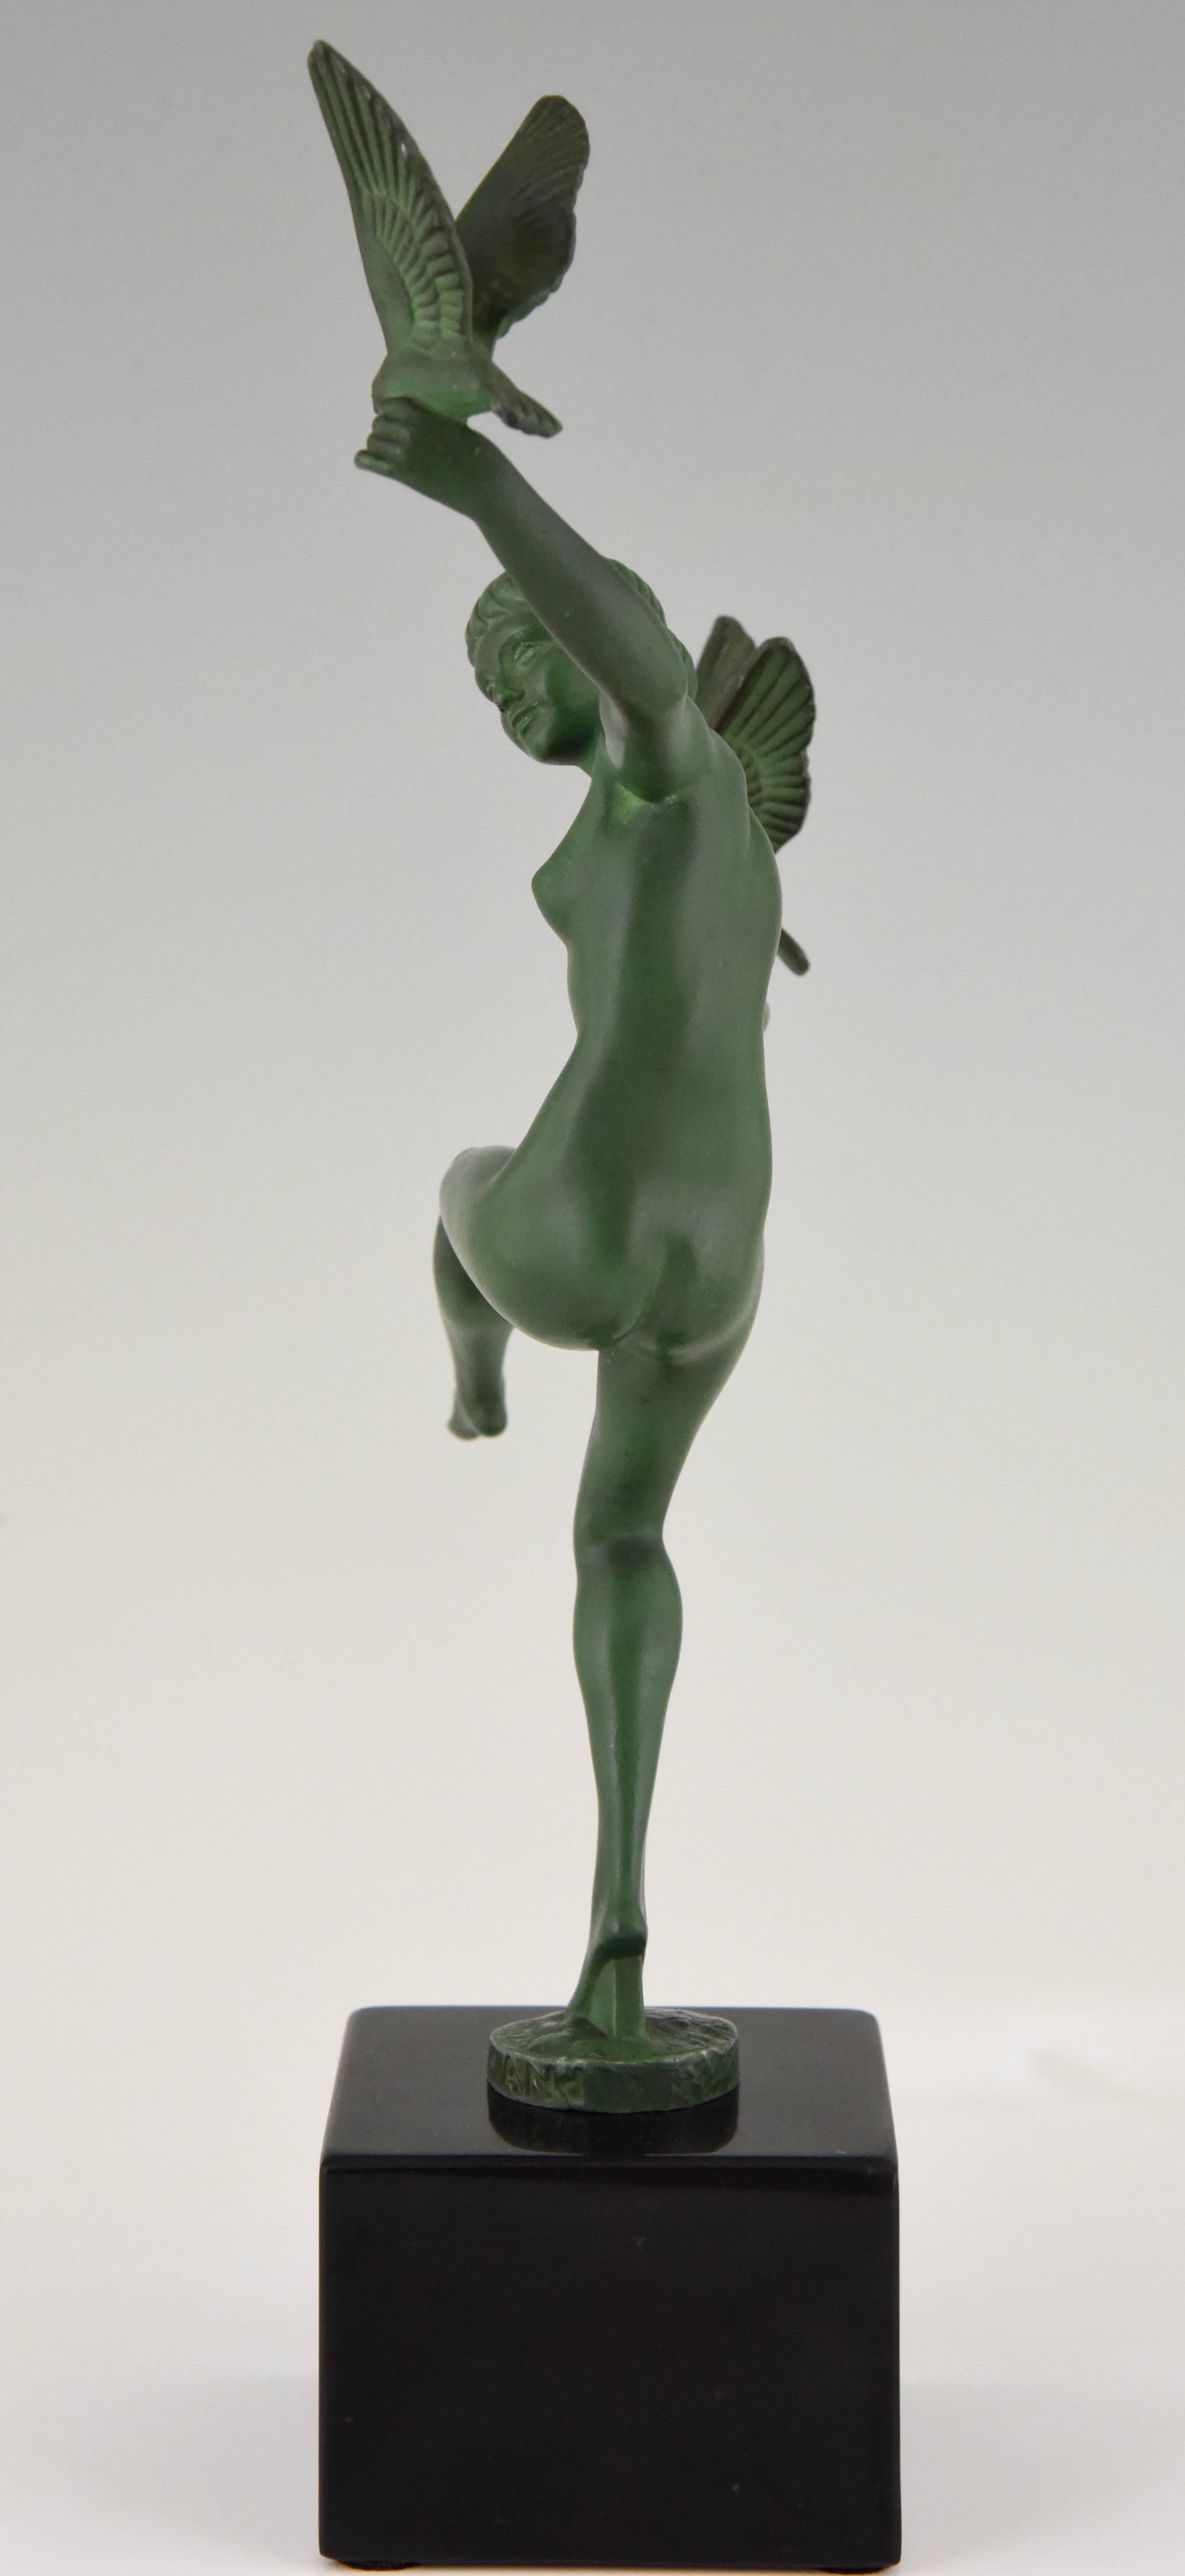 French Art Deco Sculpture Nude Dancer with Birds by Briand, Marcel Bouraine 1930 France